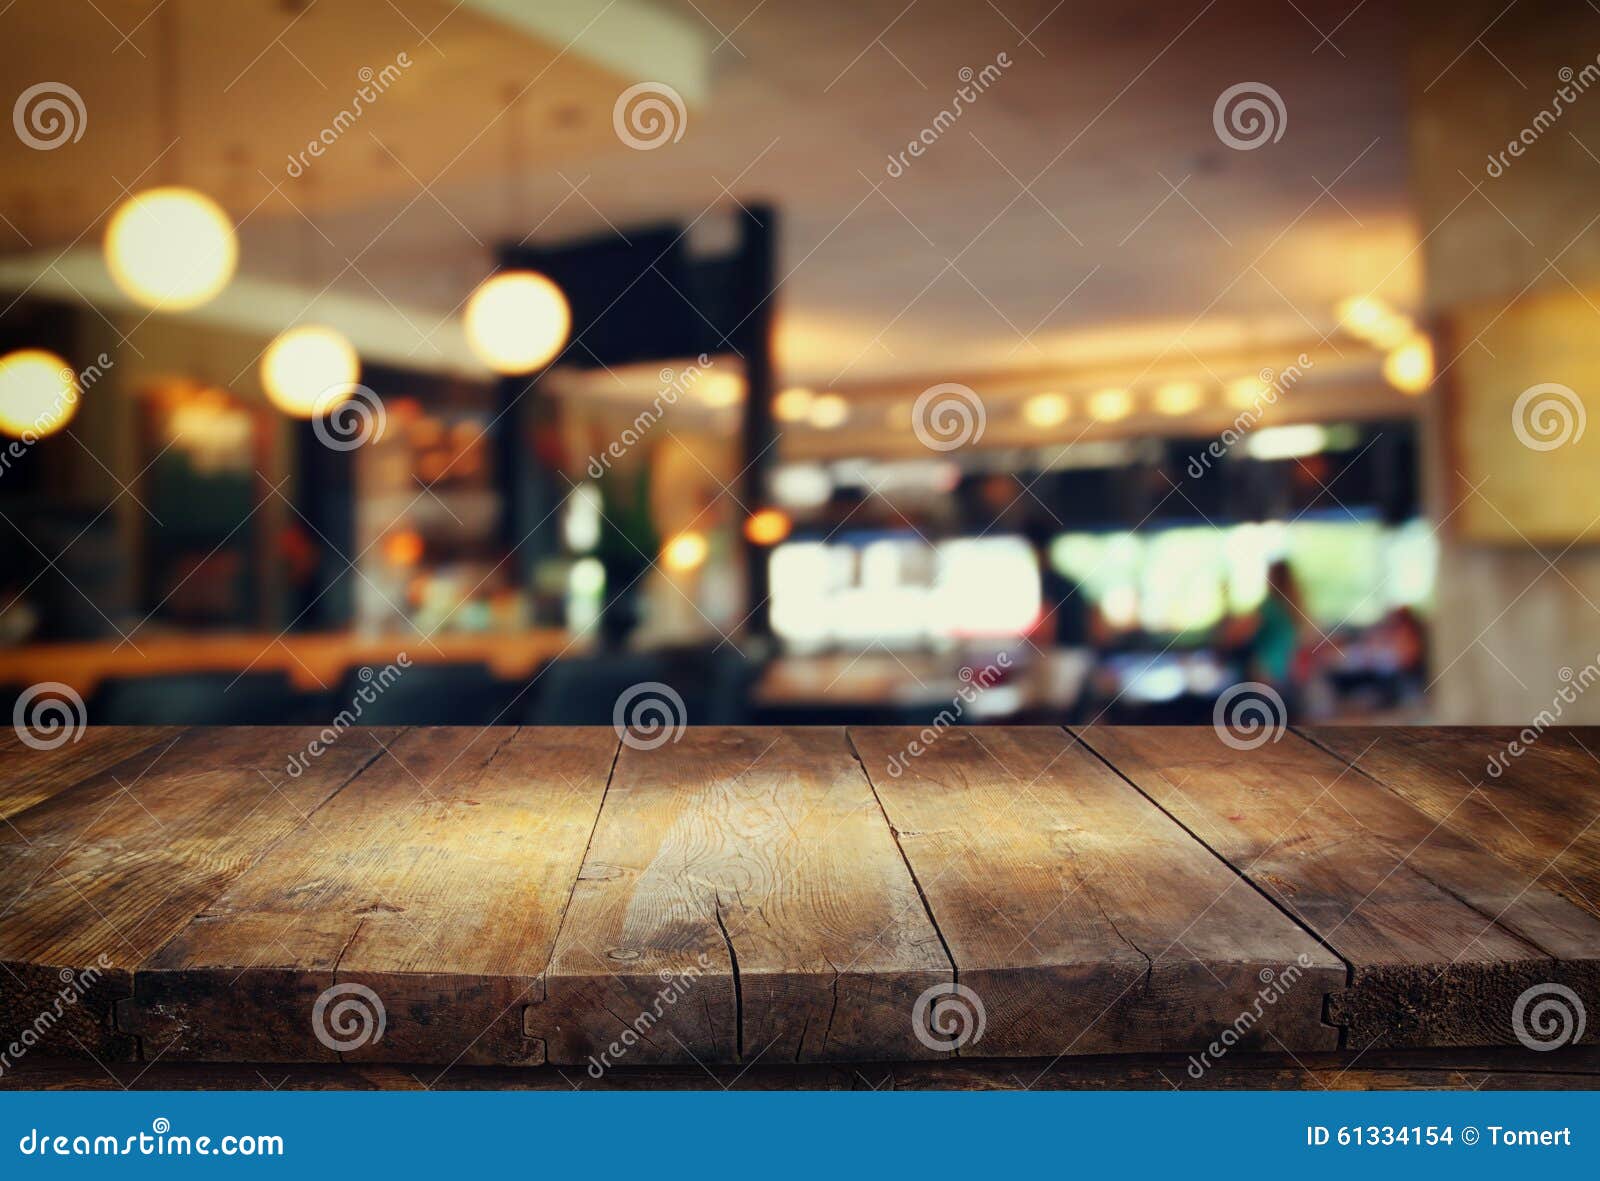 Image Of Wooden Table In Front Of Abstract Blurred 